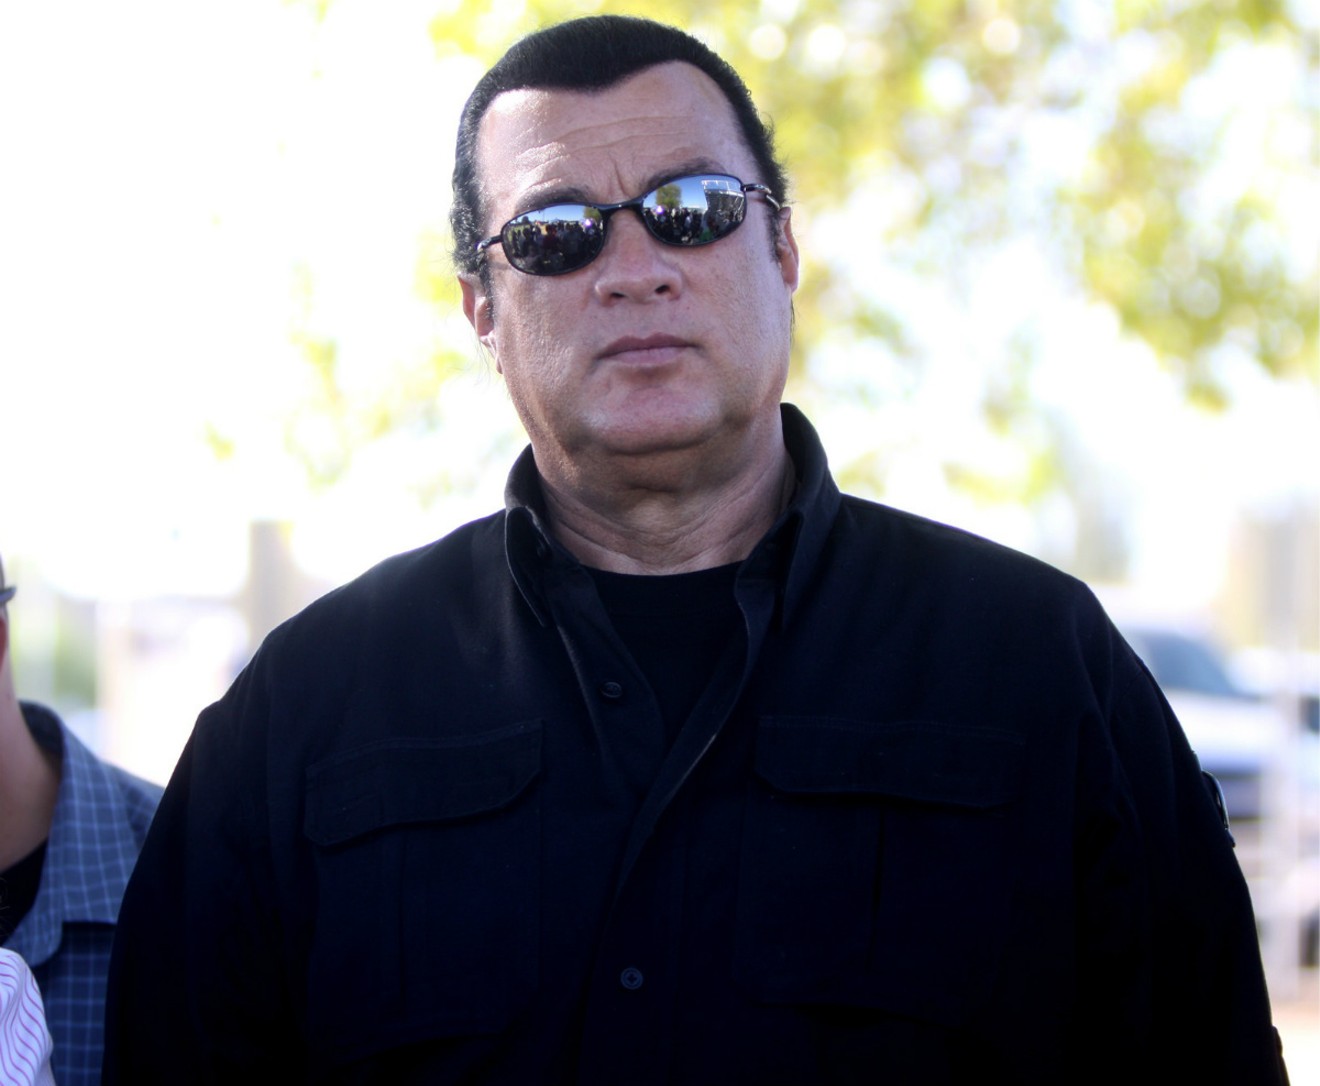 Even Steven Seagal couldn't bust out of jury duty...